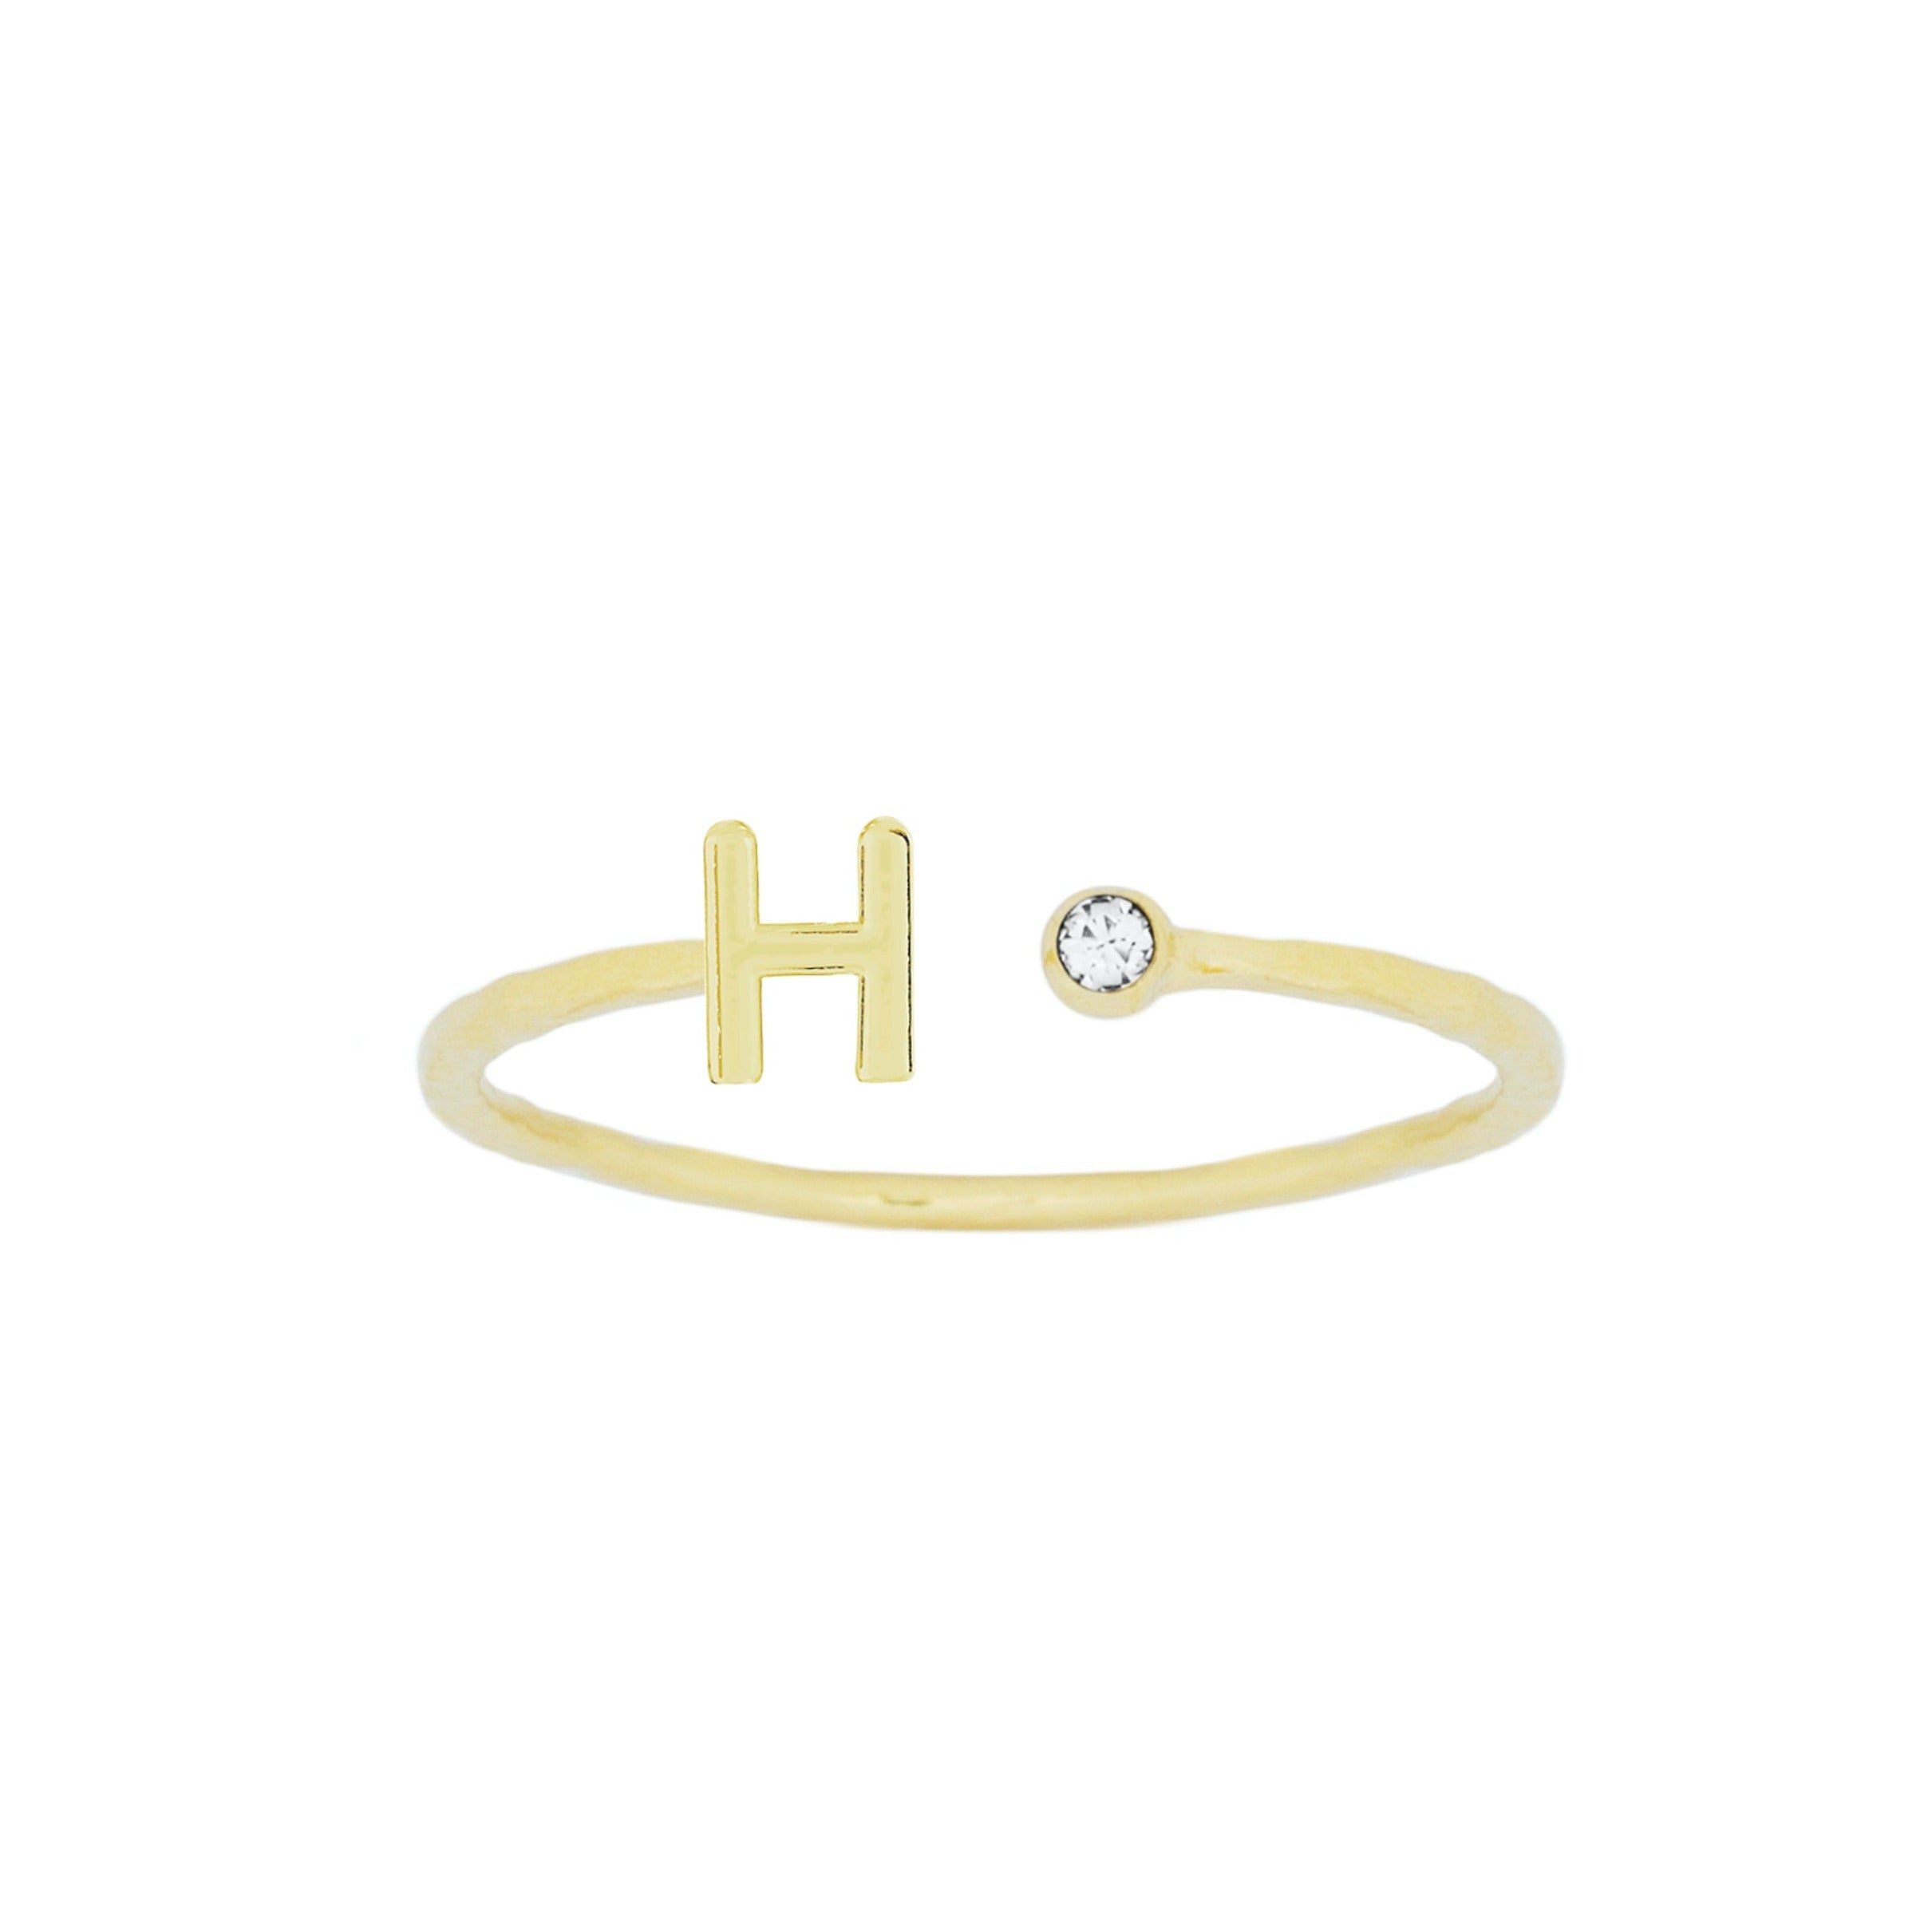 Gold Initial Ring - The Coastal Cottage Bay Head